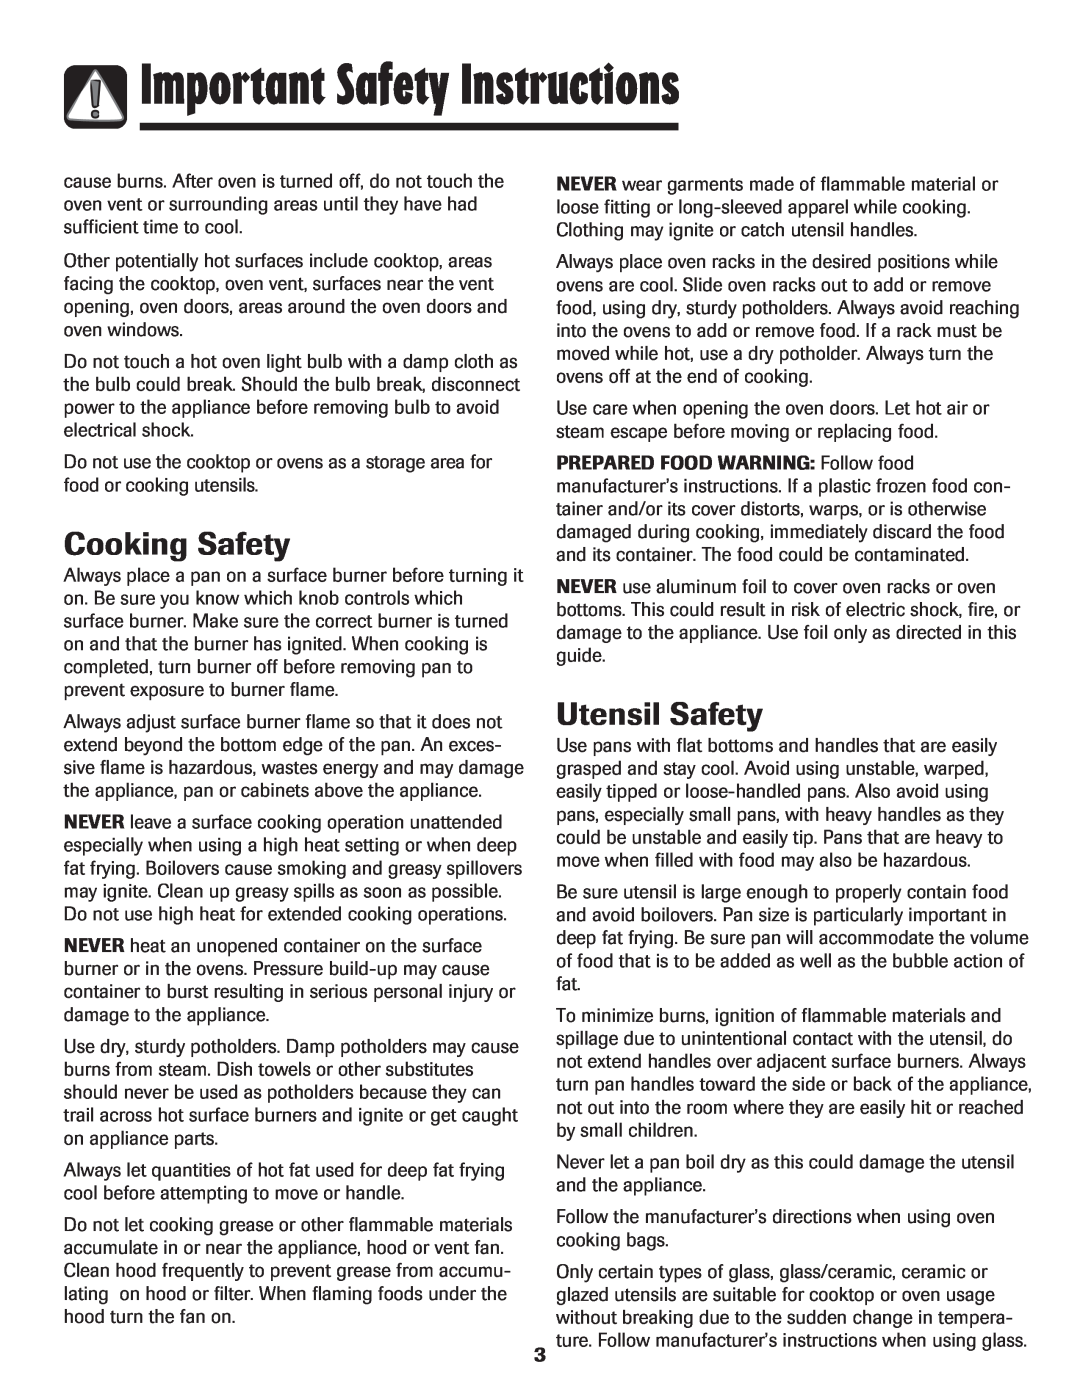 Maytag MGR6751BDW manual Cooking Safety, Utensil Safety, Important Safety Instructions 